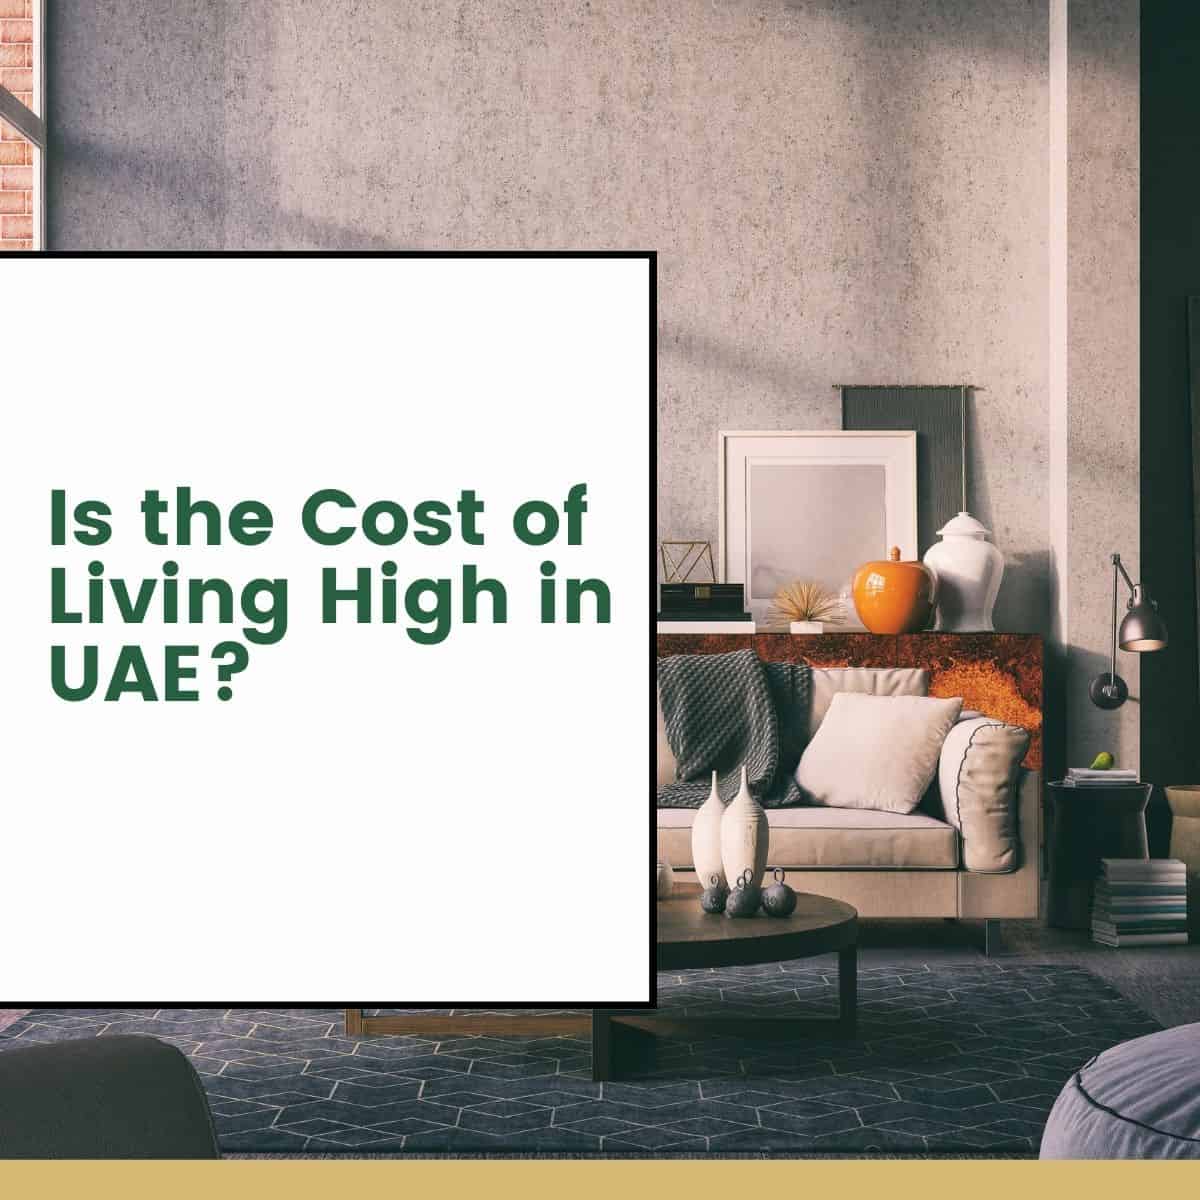 Is the Cost of Living High in UAE?